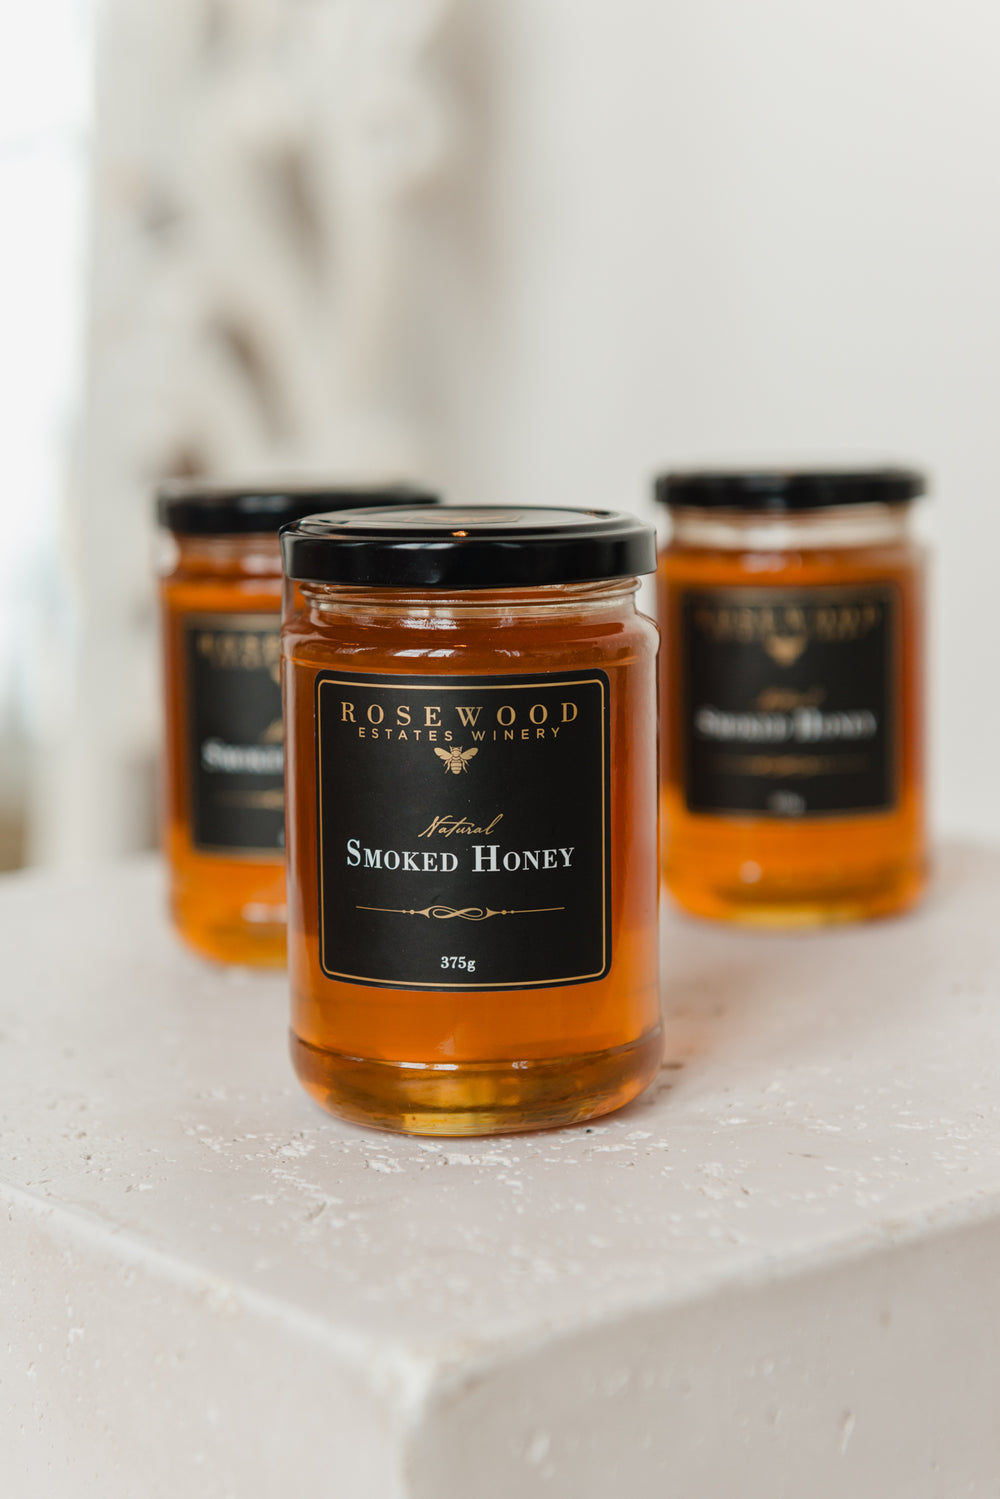 Rosewood Smoked Honey Toronto Delivery Olive & Fig Oakville